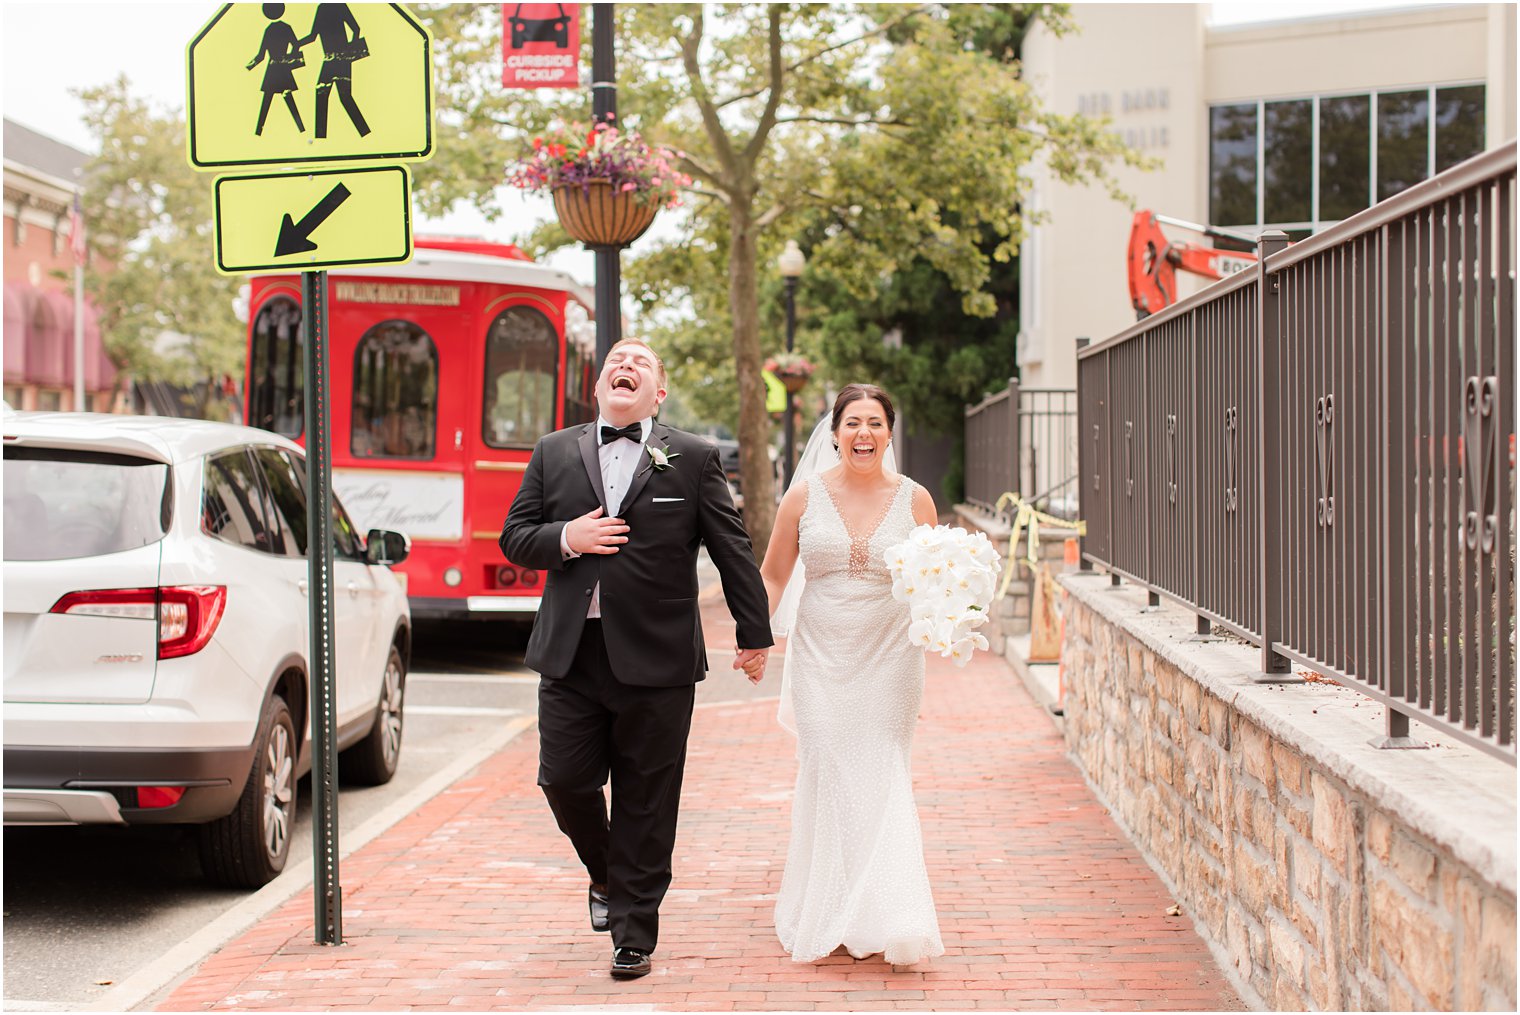 bride laughs walking with brother during wedding day